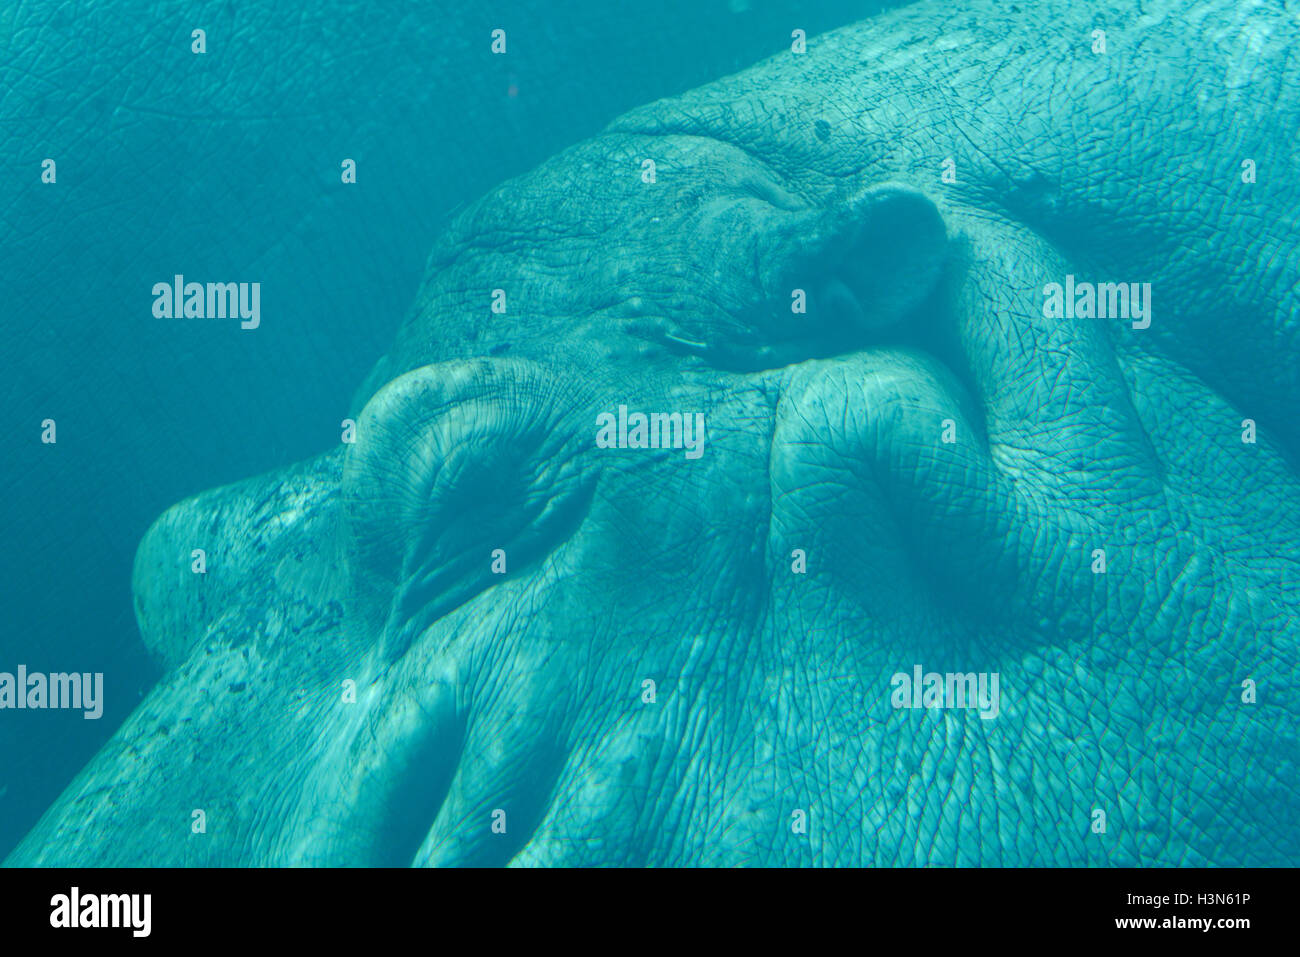 A hippo's eyes and ears underwater Stock Photo